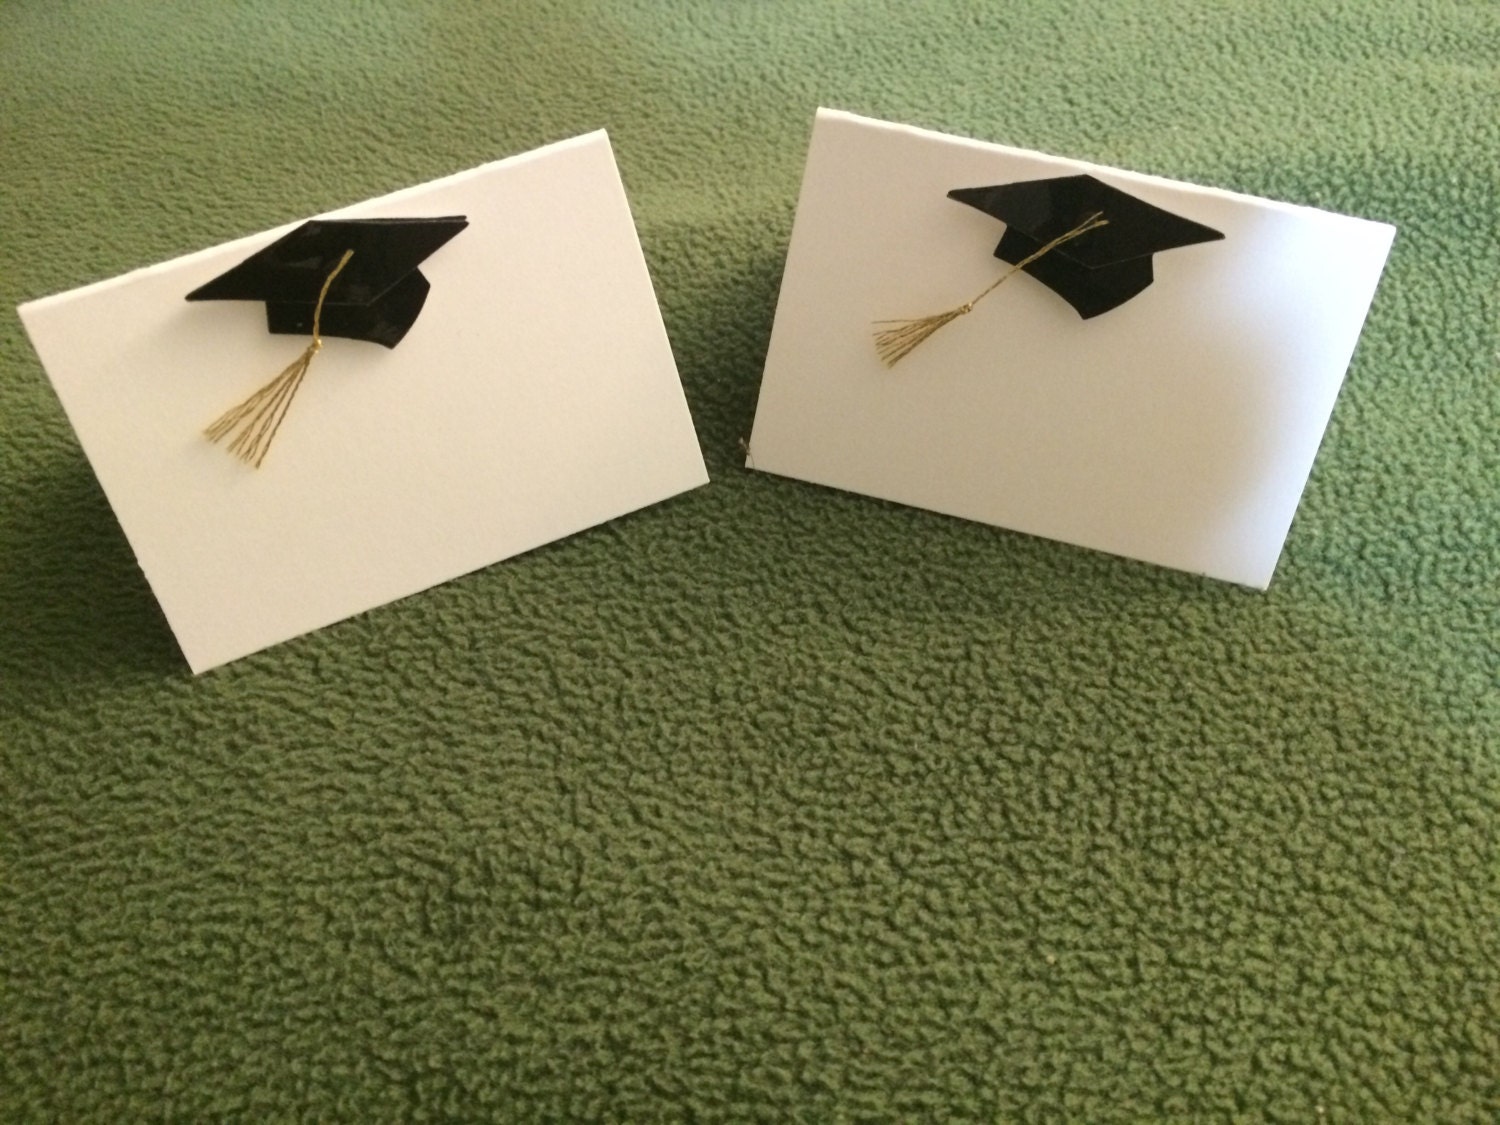 graduation-party-place-cards-12-cards-ingredients-cards-food